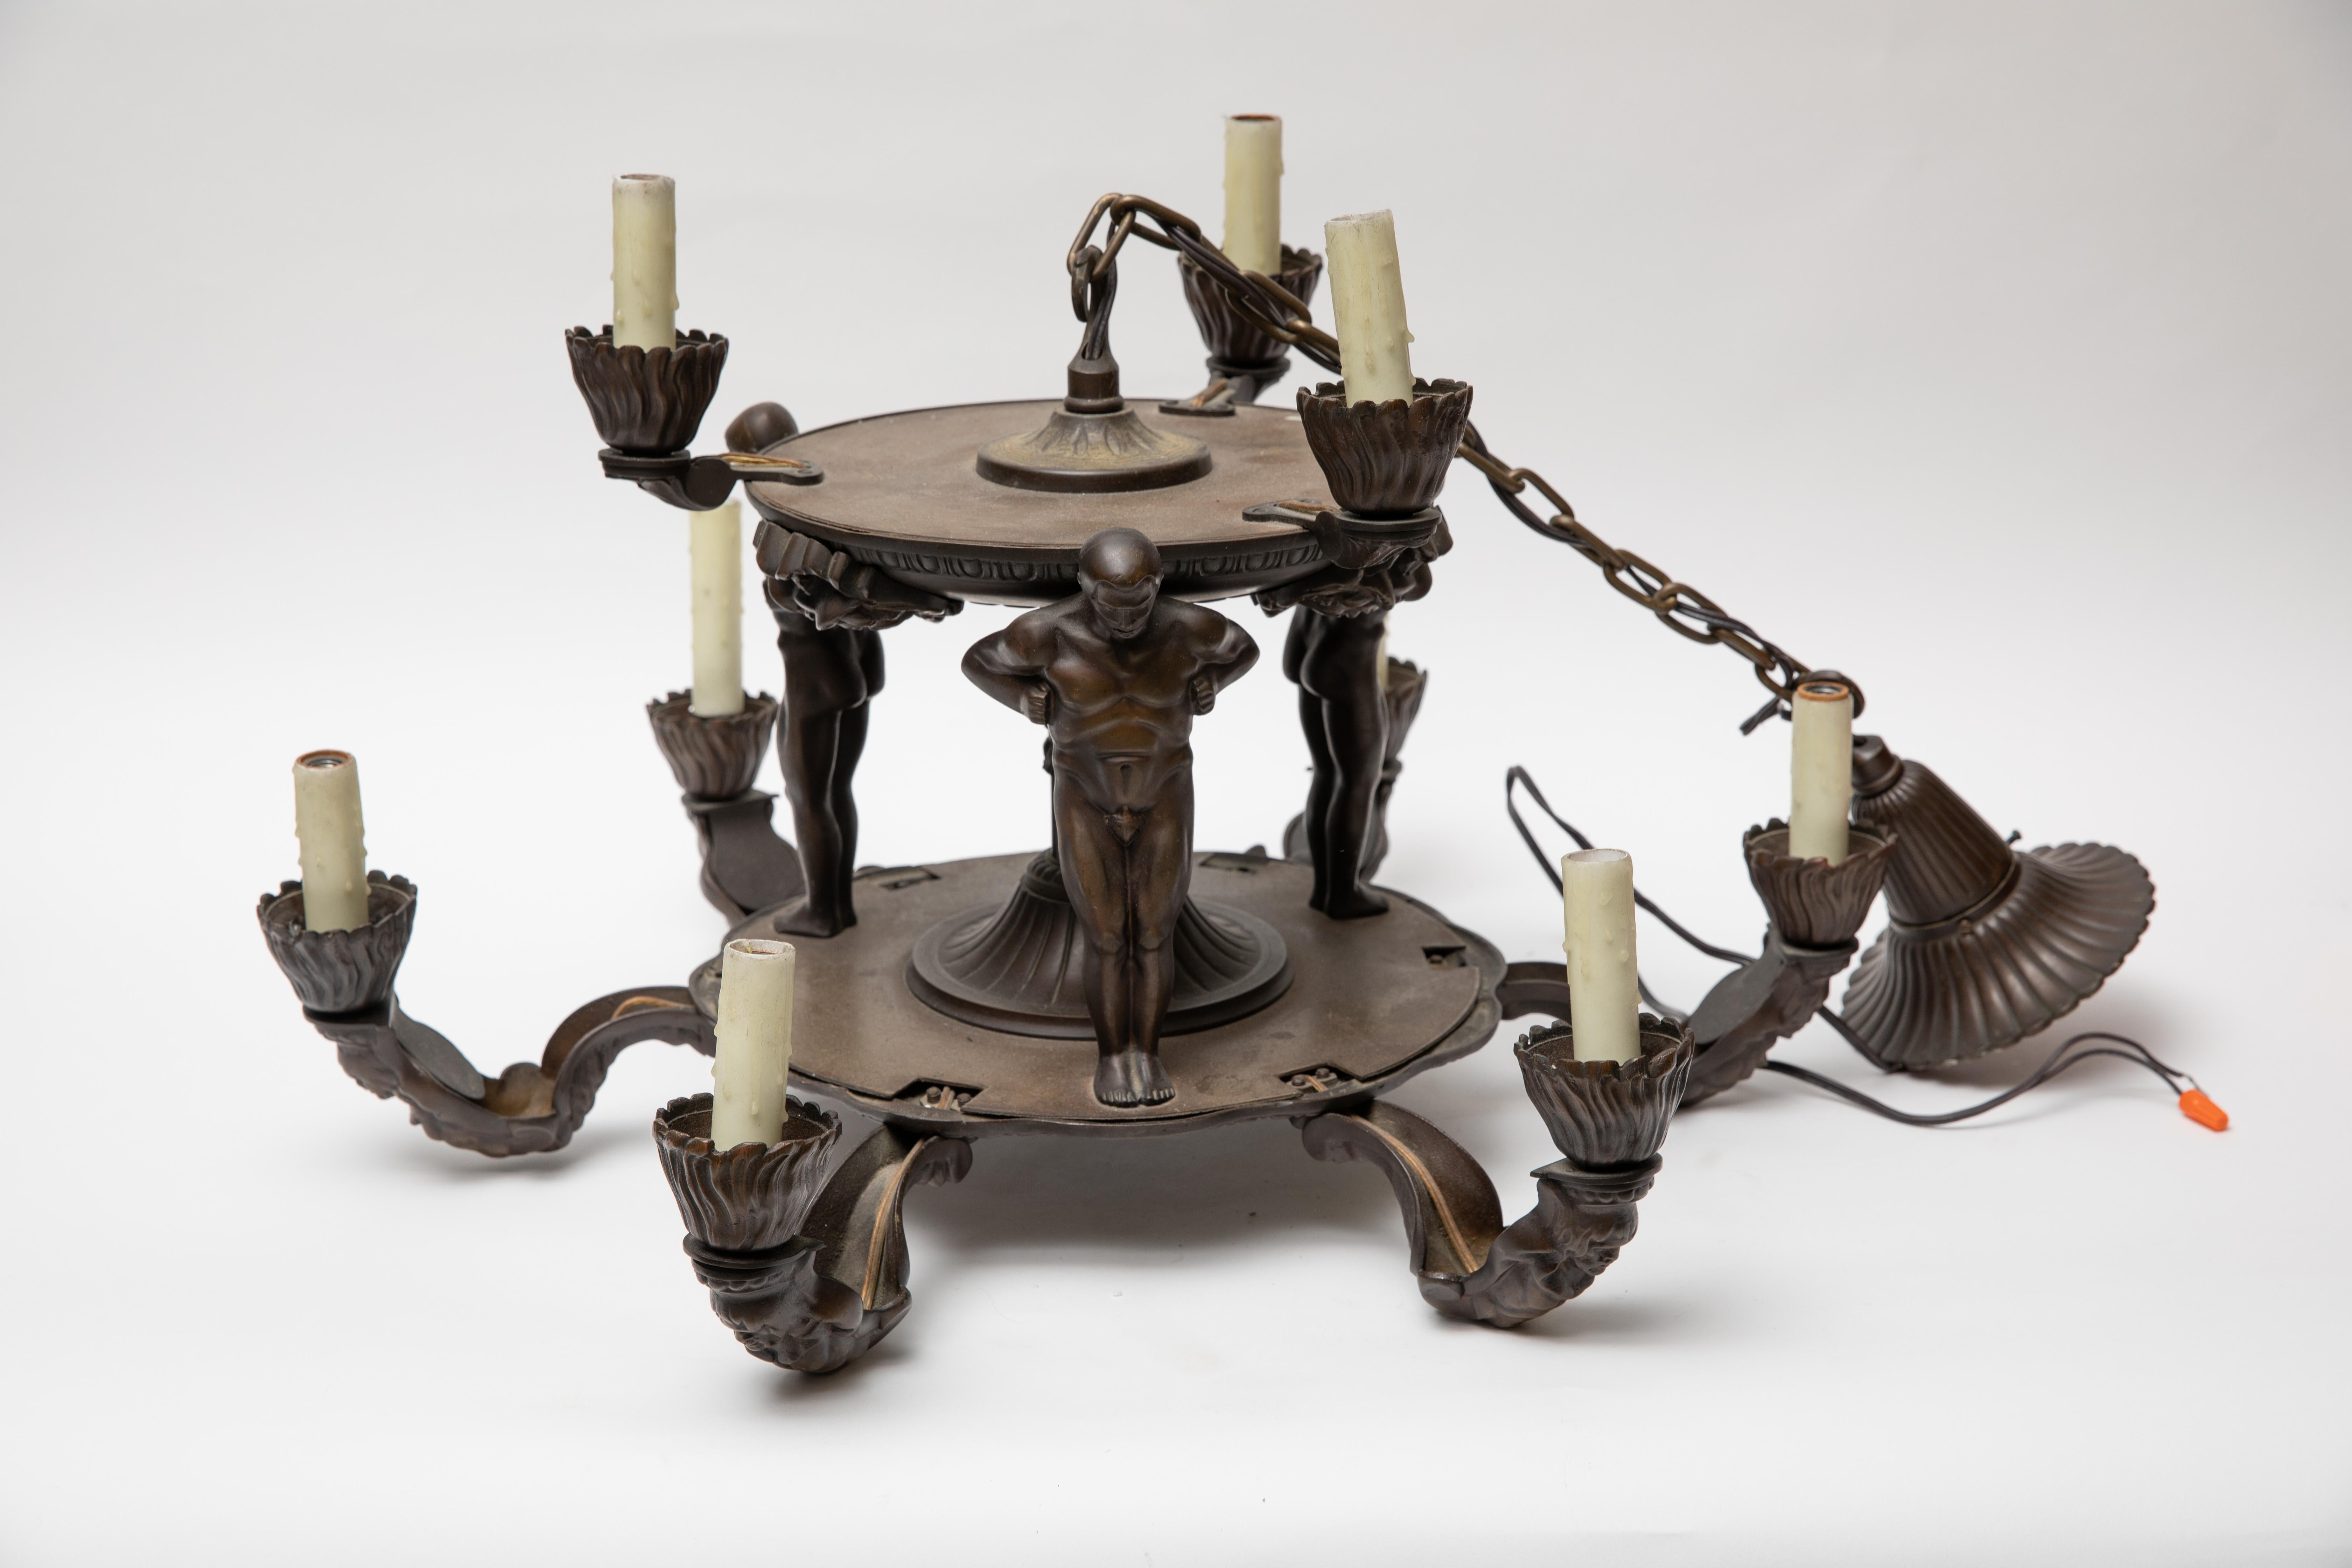 Exceptional bronze Wiener Werkstätte, Gurschner style nine-light chandelier.  Circa 1930. Two tiers having three standing male figures supporting the upper three-light structure, the lower six-light segment with arms embellished with masks and